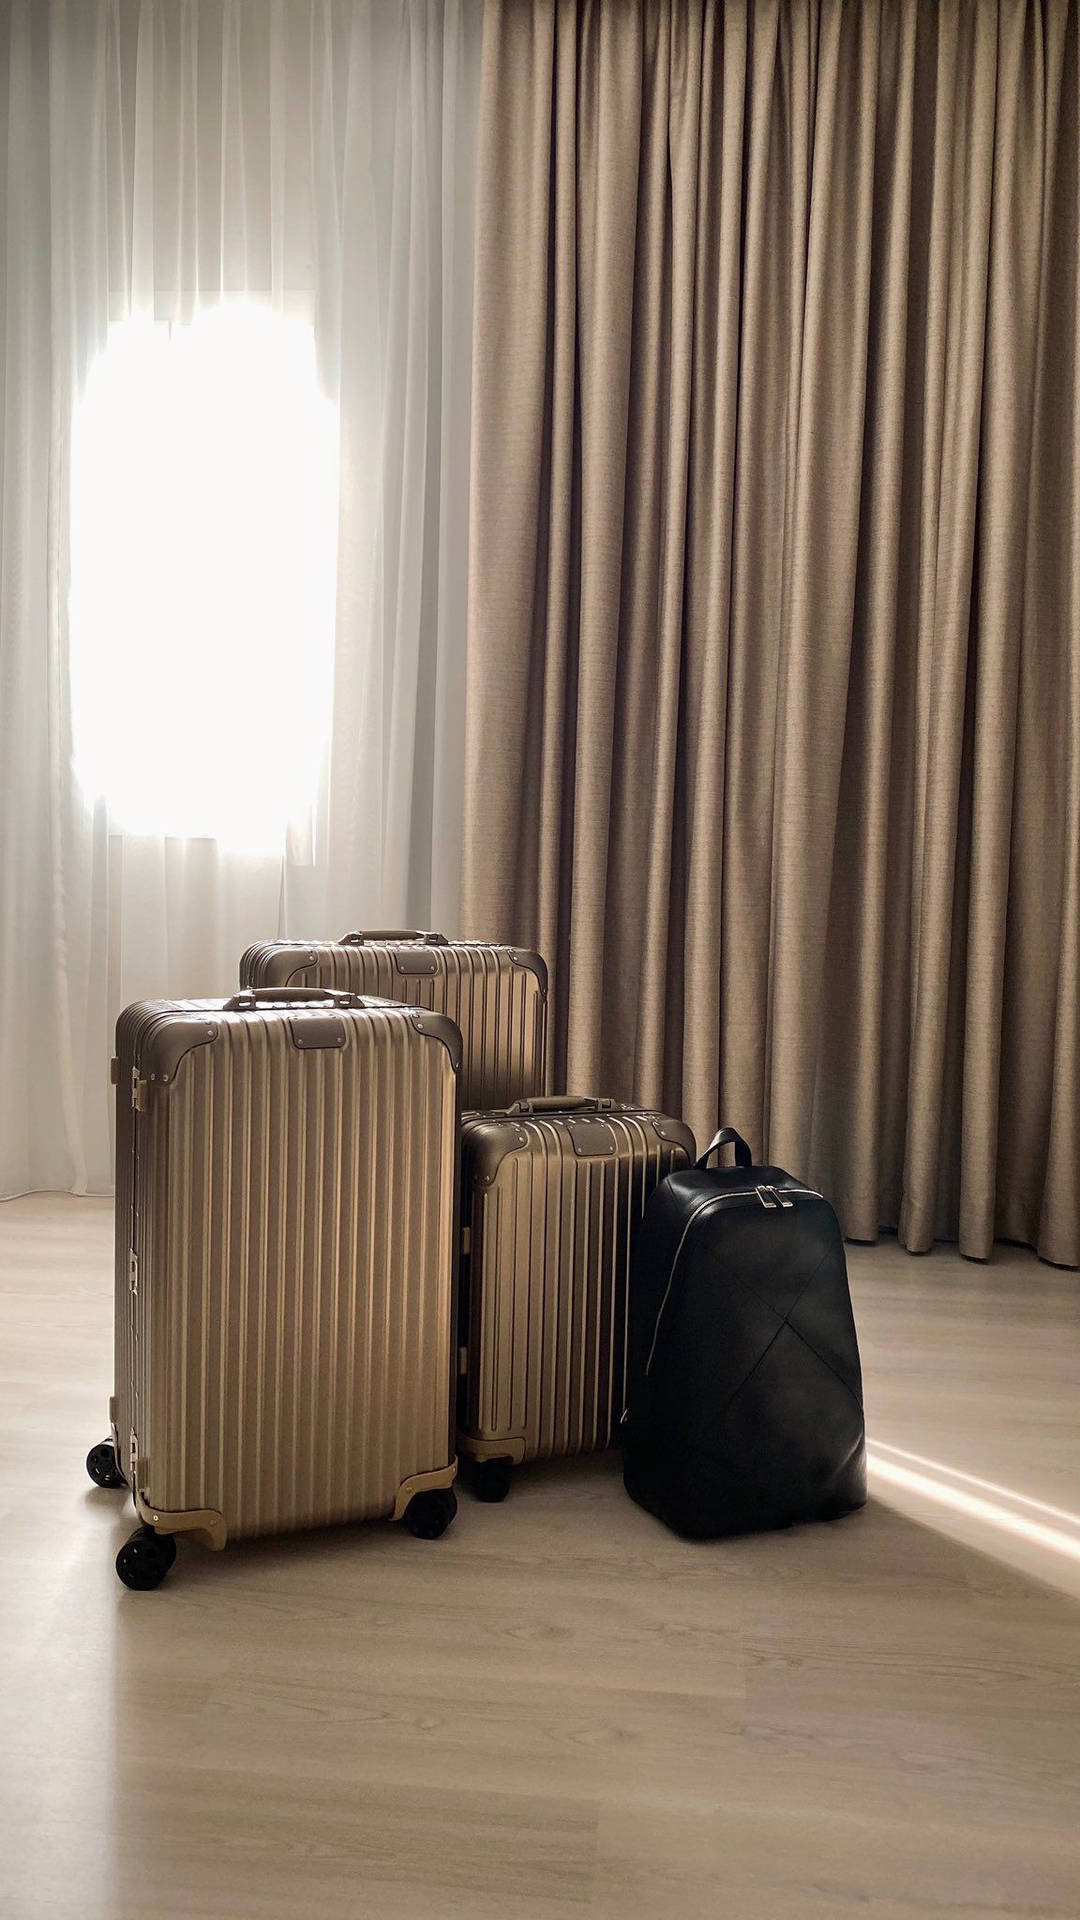 Rimowa Suitcases In Bright Room Wallpaper